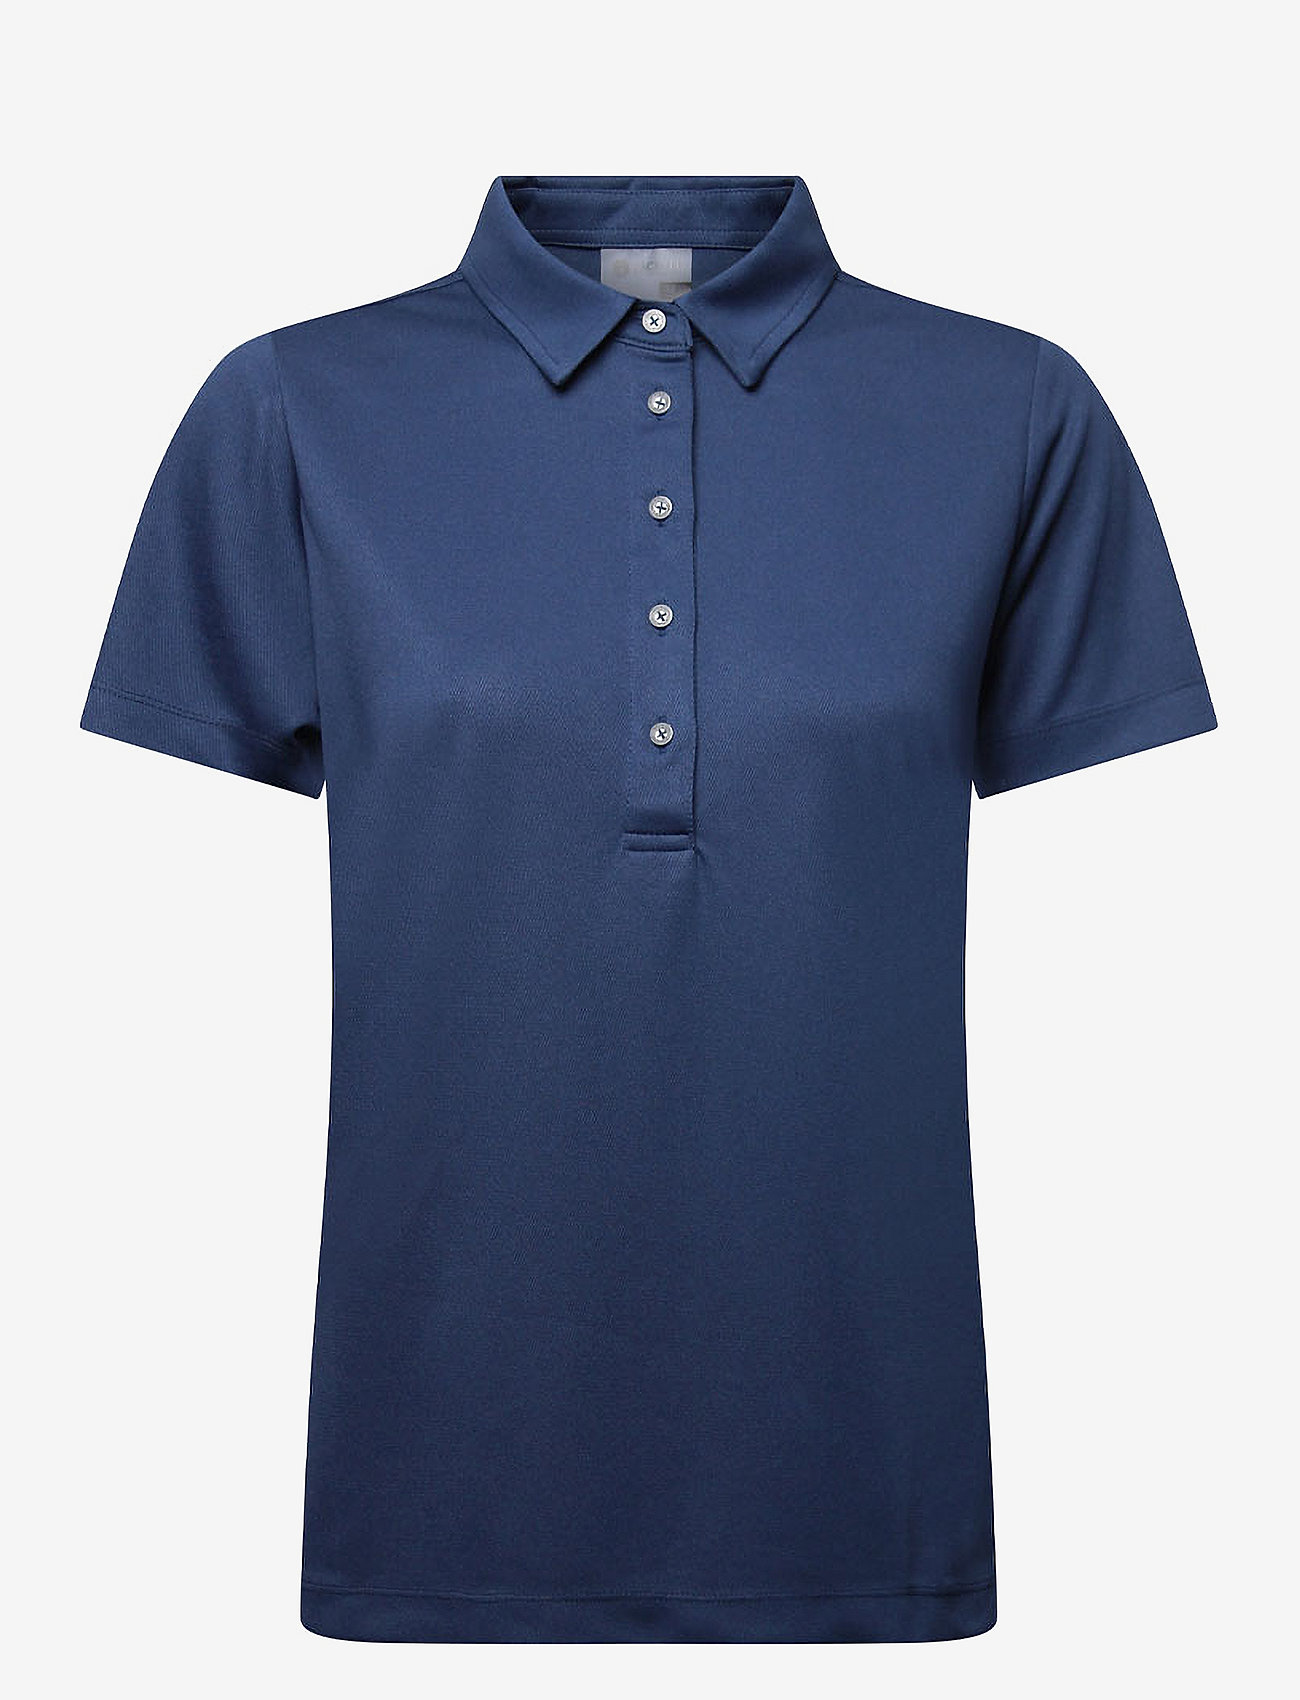 BACKTEE - Ladies Performance Polo - toppe & t-shirts - navy - 1